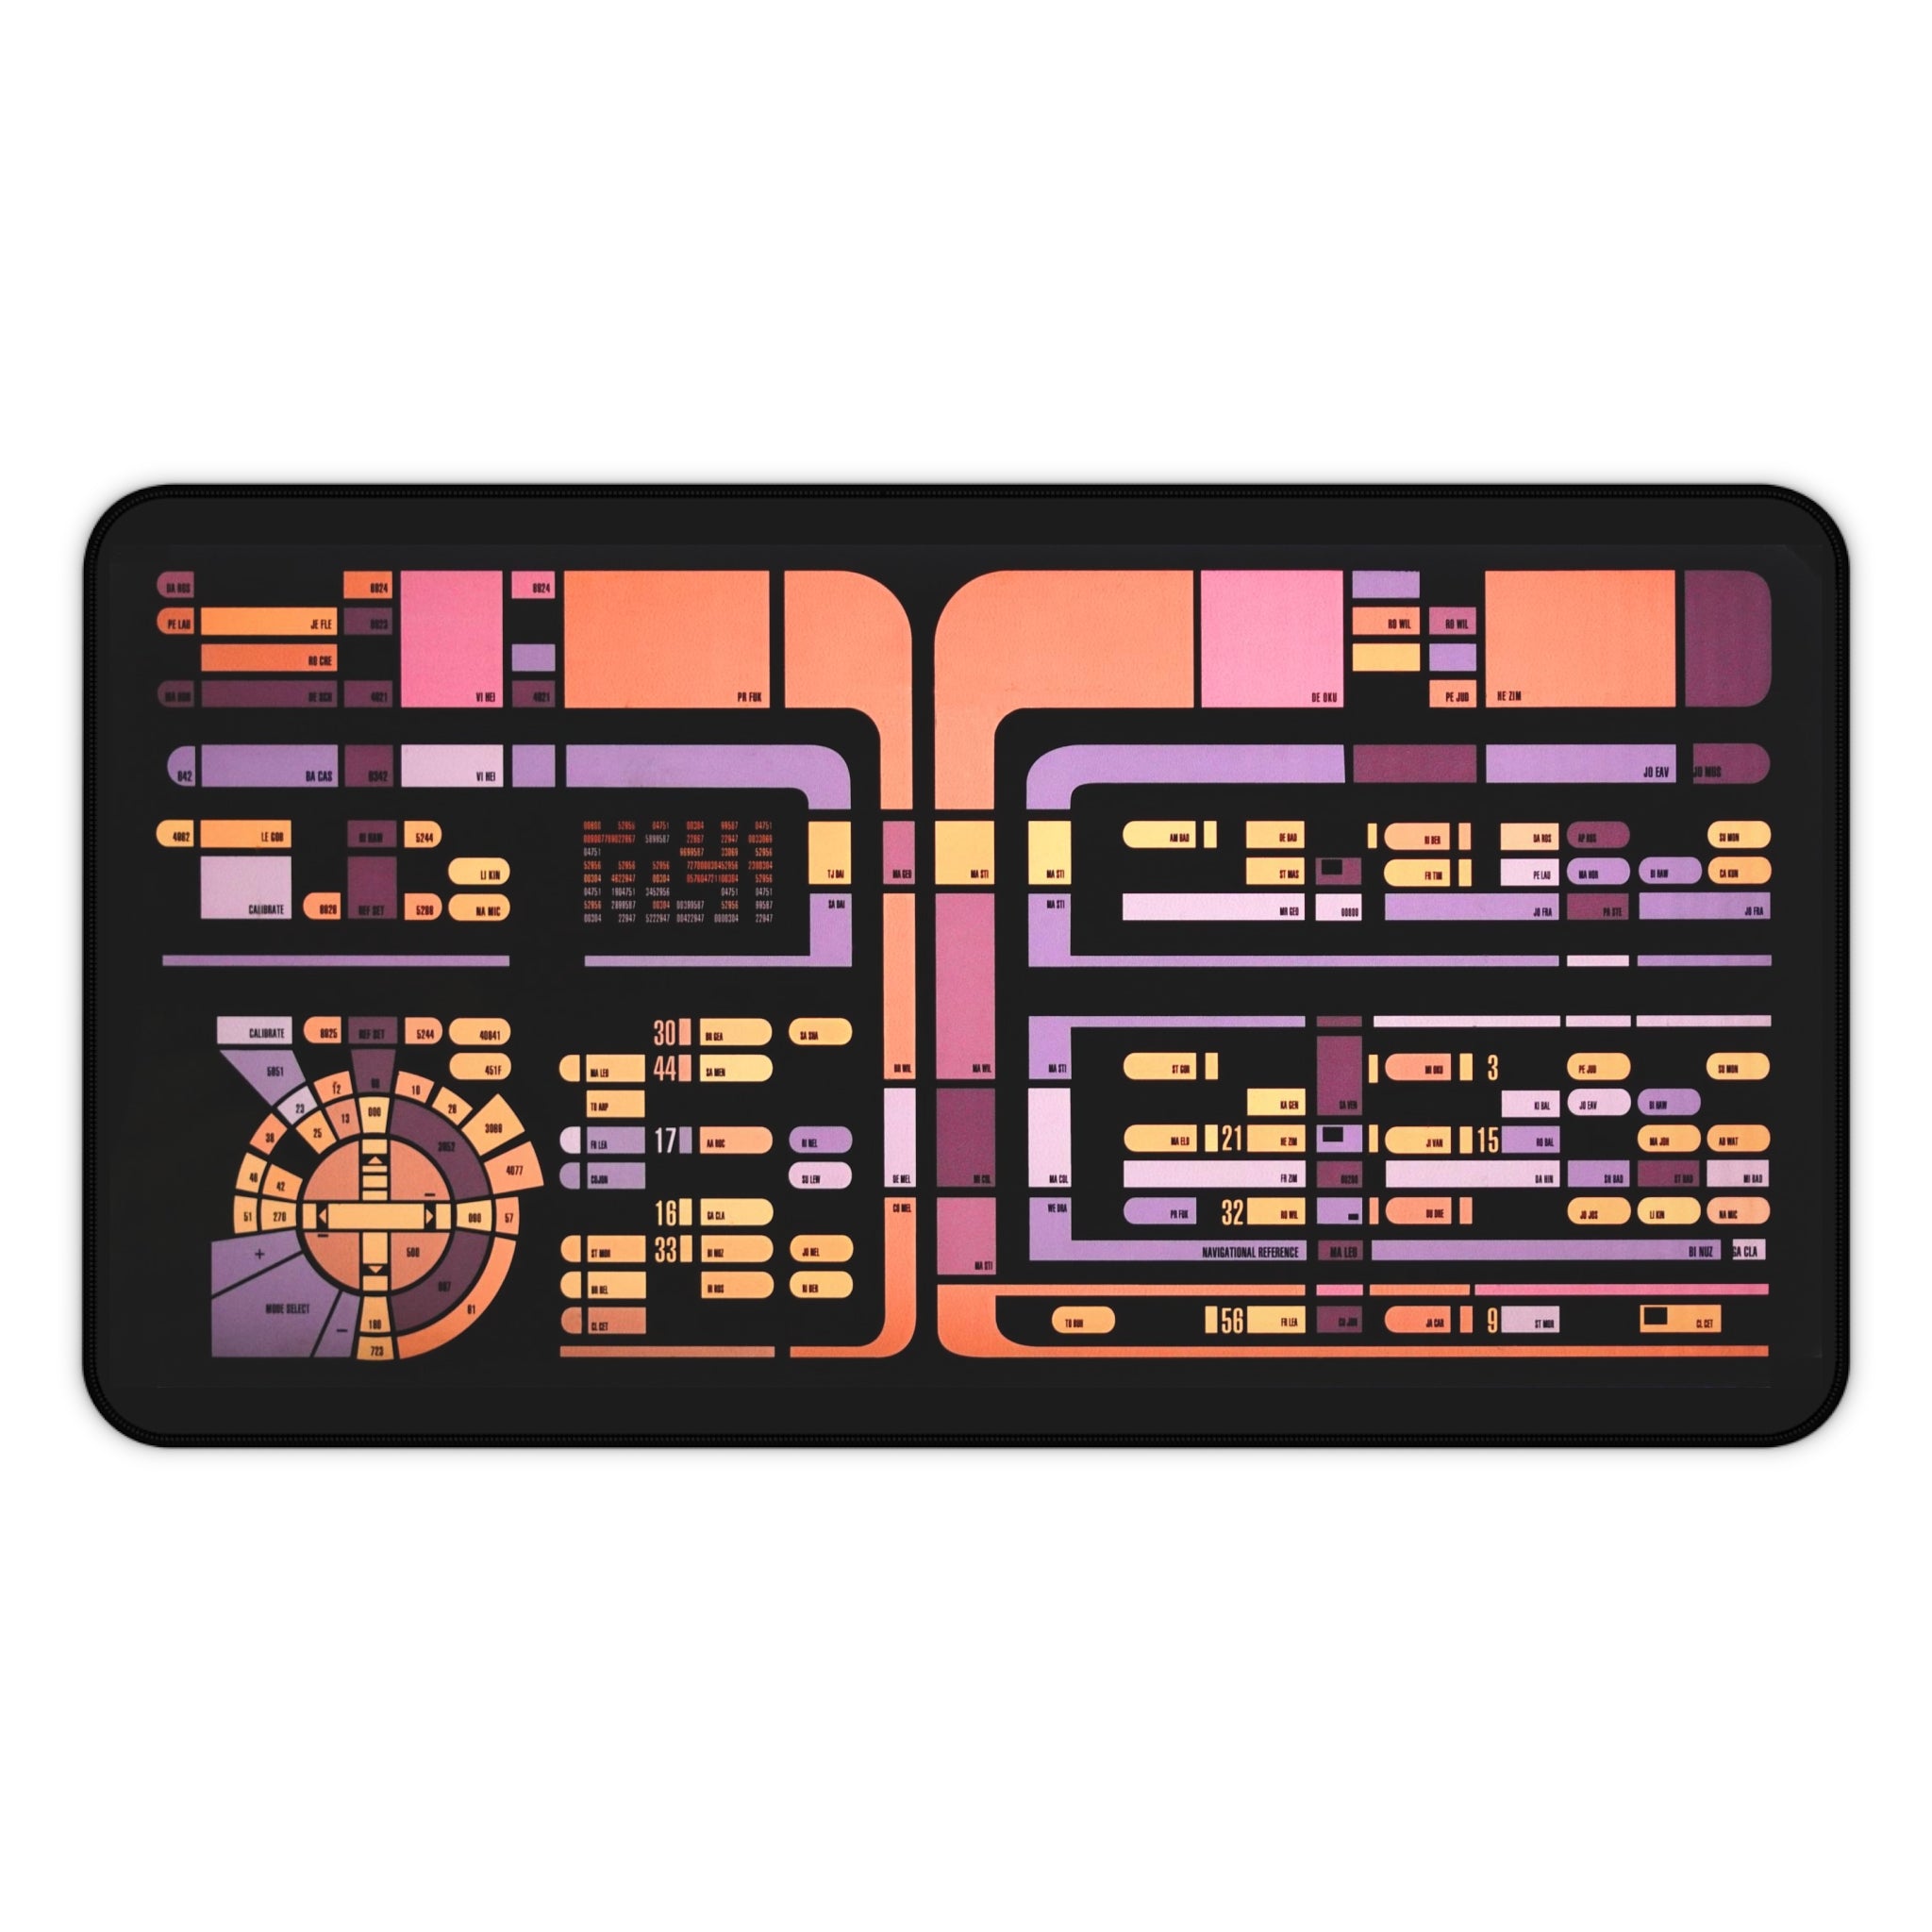 TNG LCARS Desk Mat -  This image is from a screen used translight!